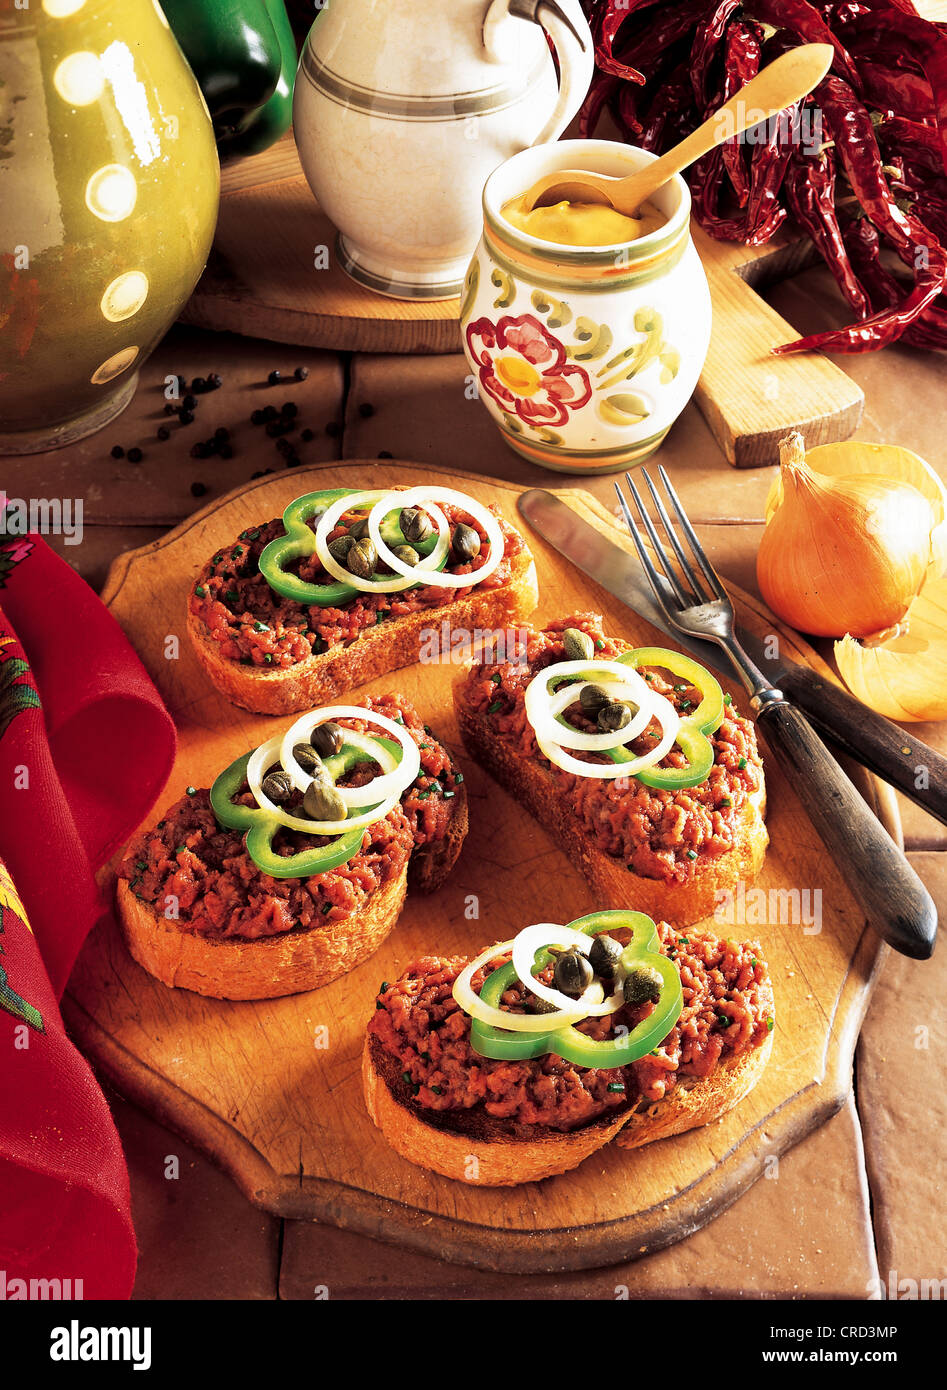 Hungarian steak tartare with bread, minced beef filet, spicy seasoning, served on bread, cold starter, Hungary Stock Photo